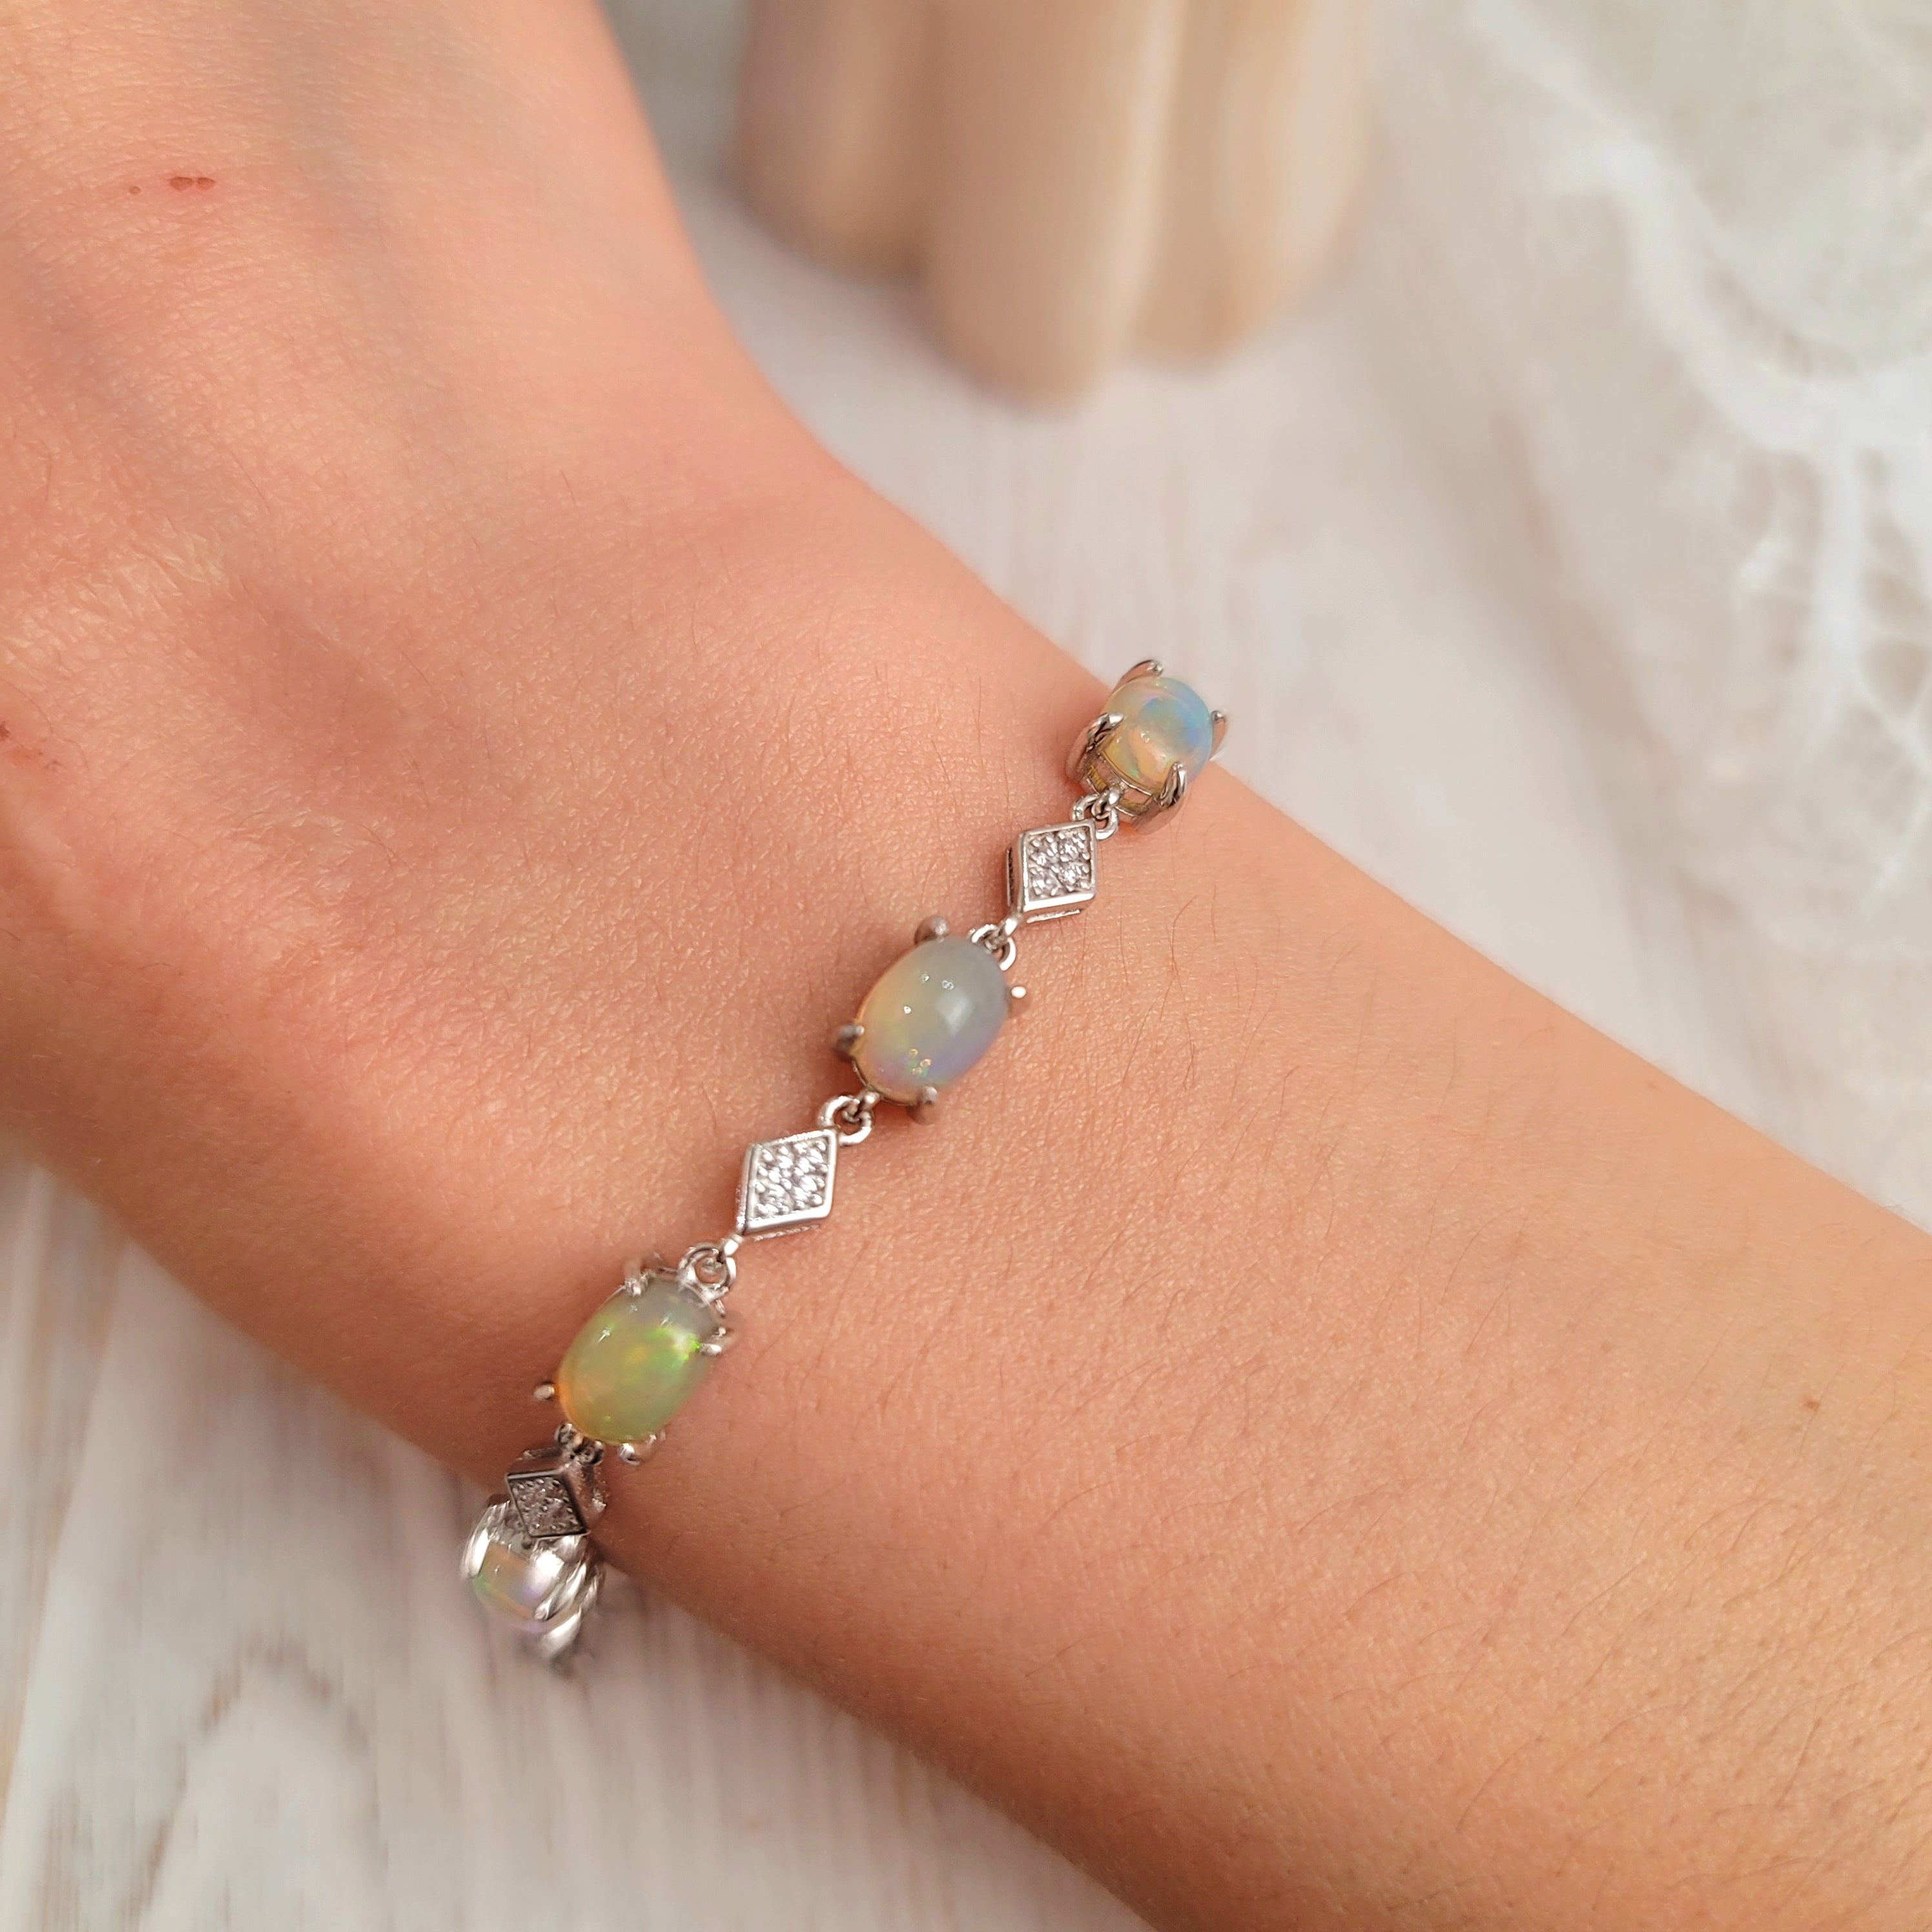 Ethiopian Opal Bracelet .925 Silver for Creativity, Joy and Self Discovery